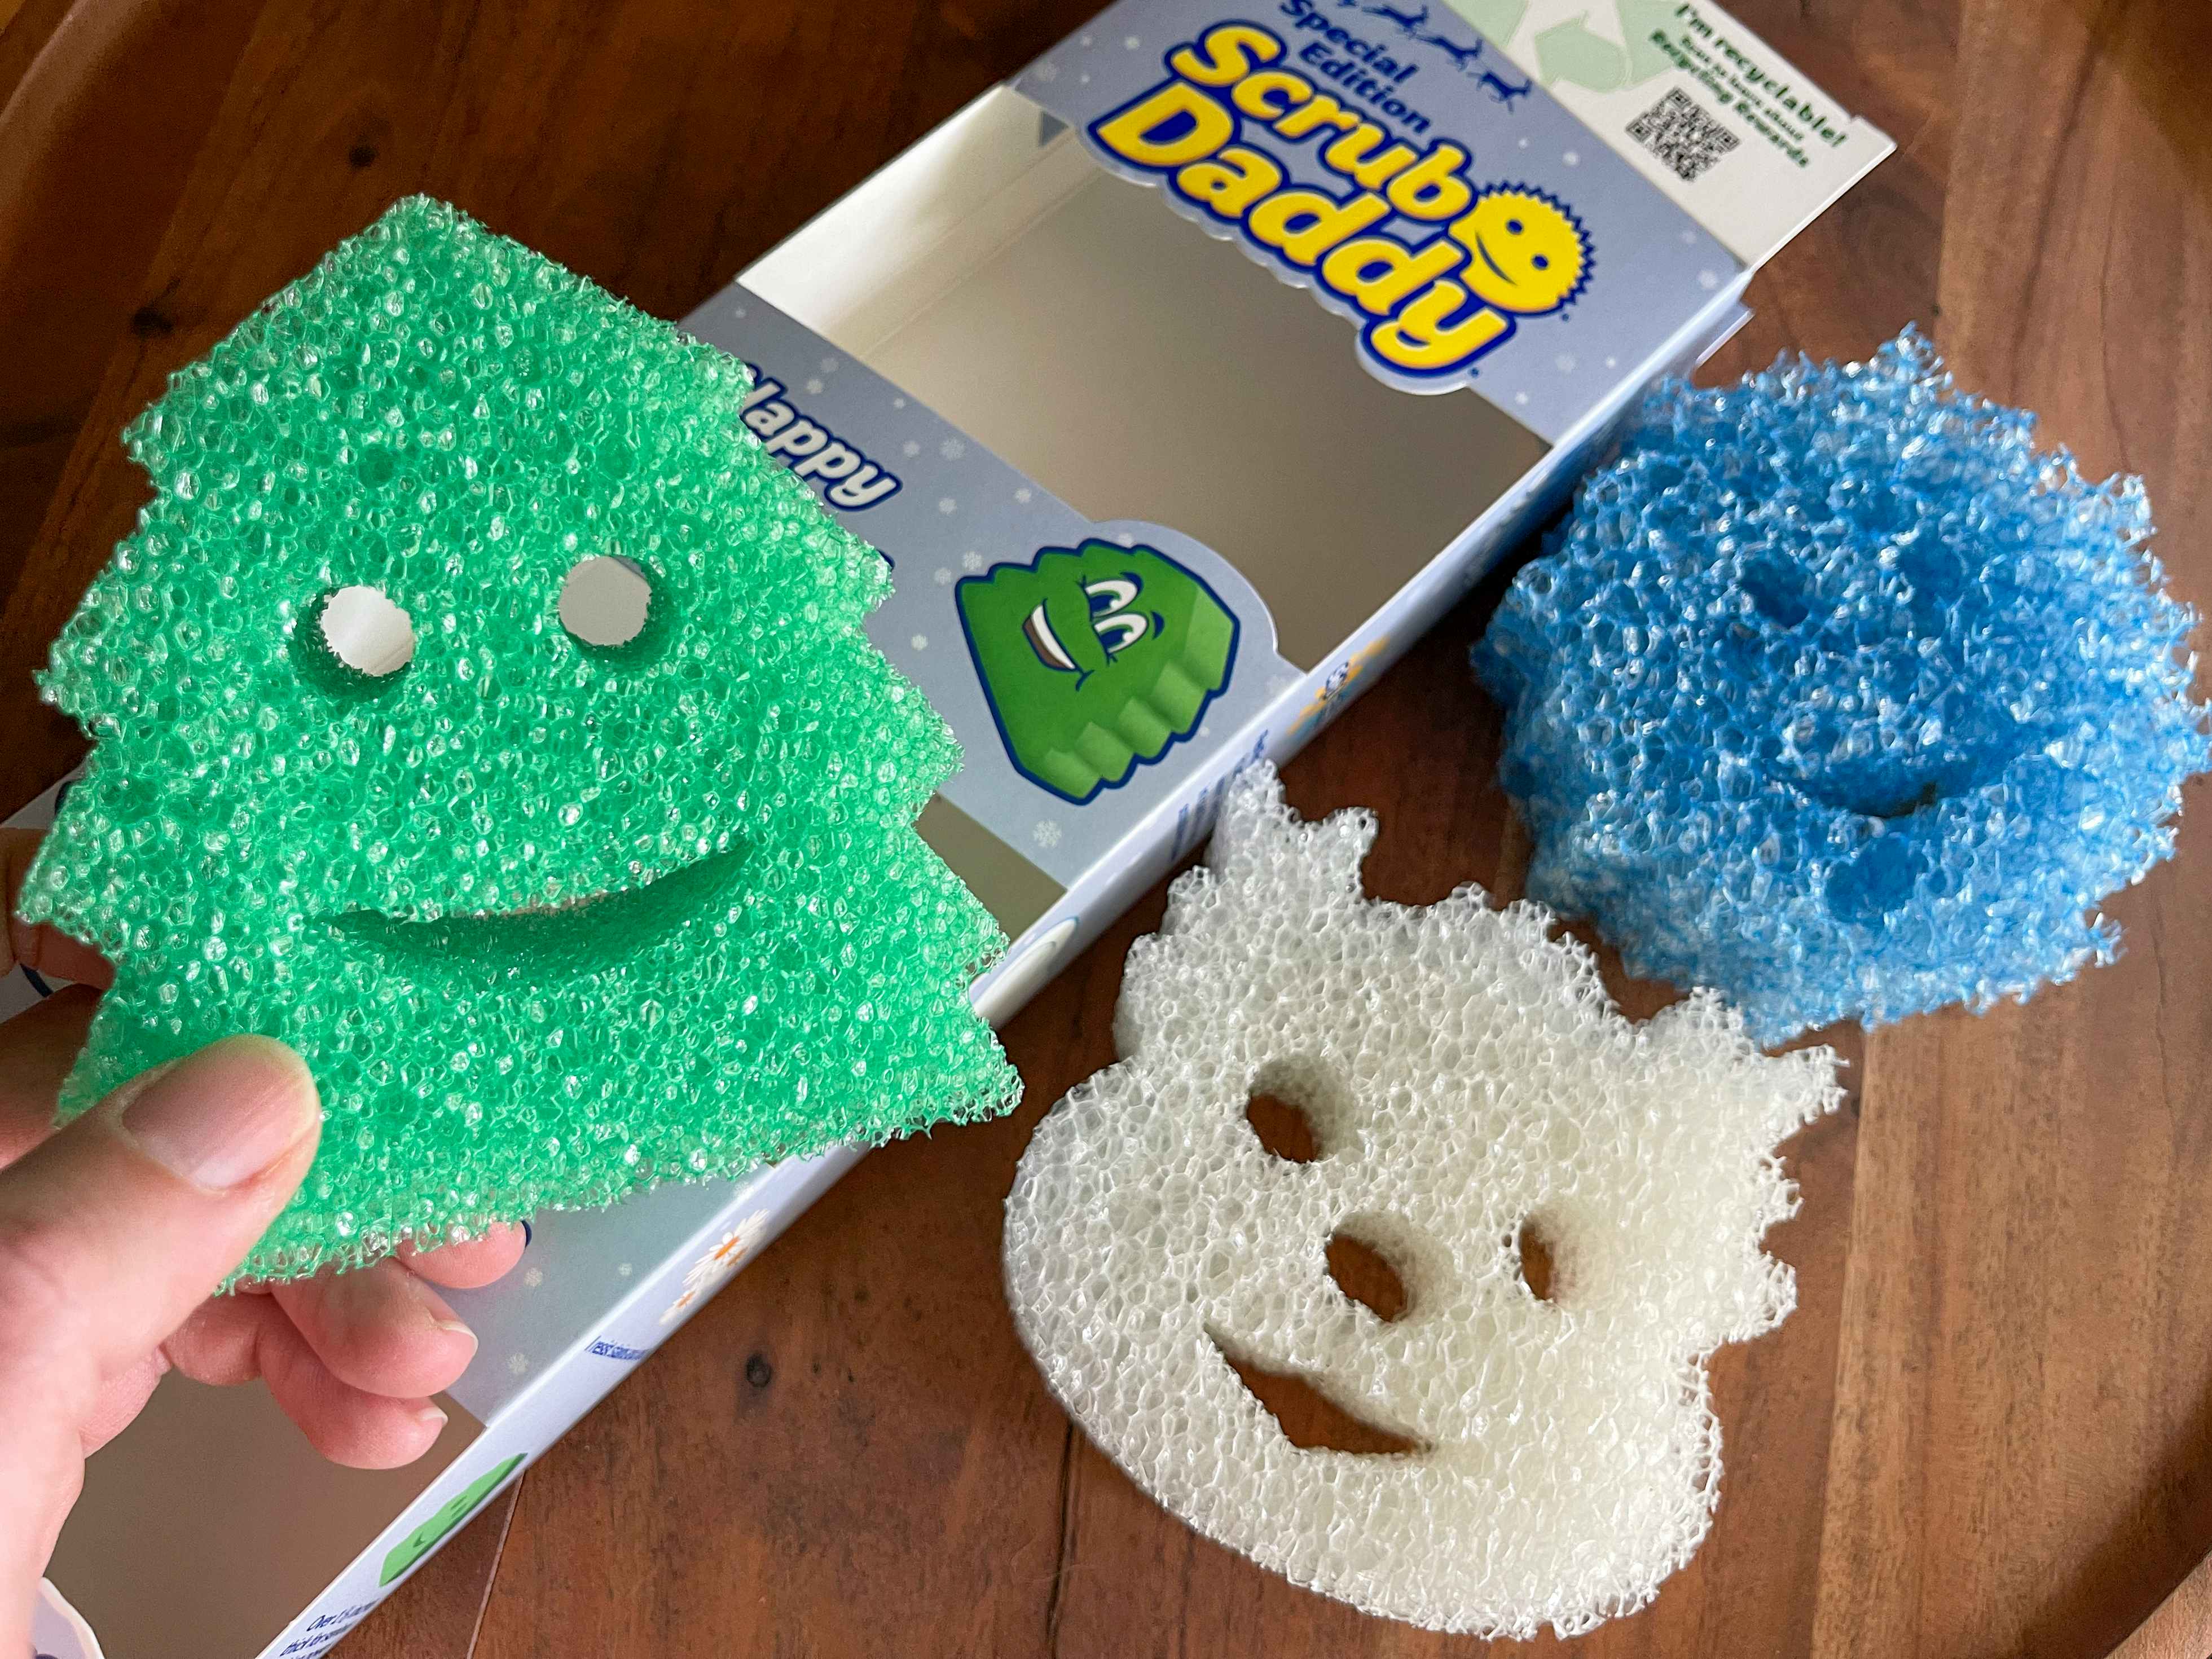 Holiday Scrub Daddy Shapes Are $4 Each, Perfect for White Elephant